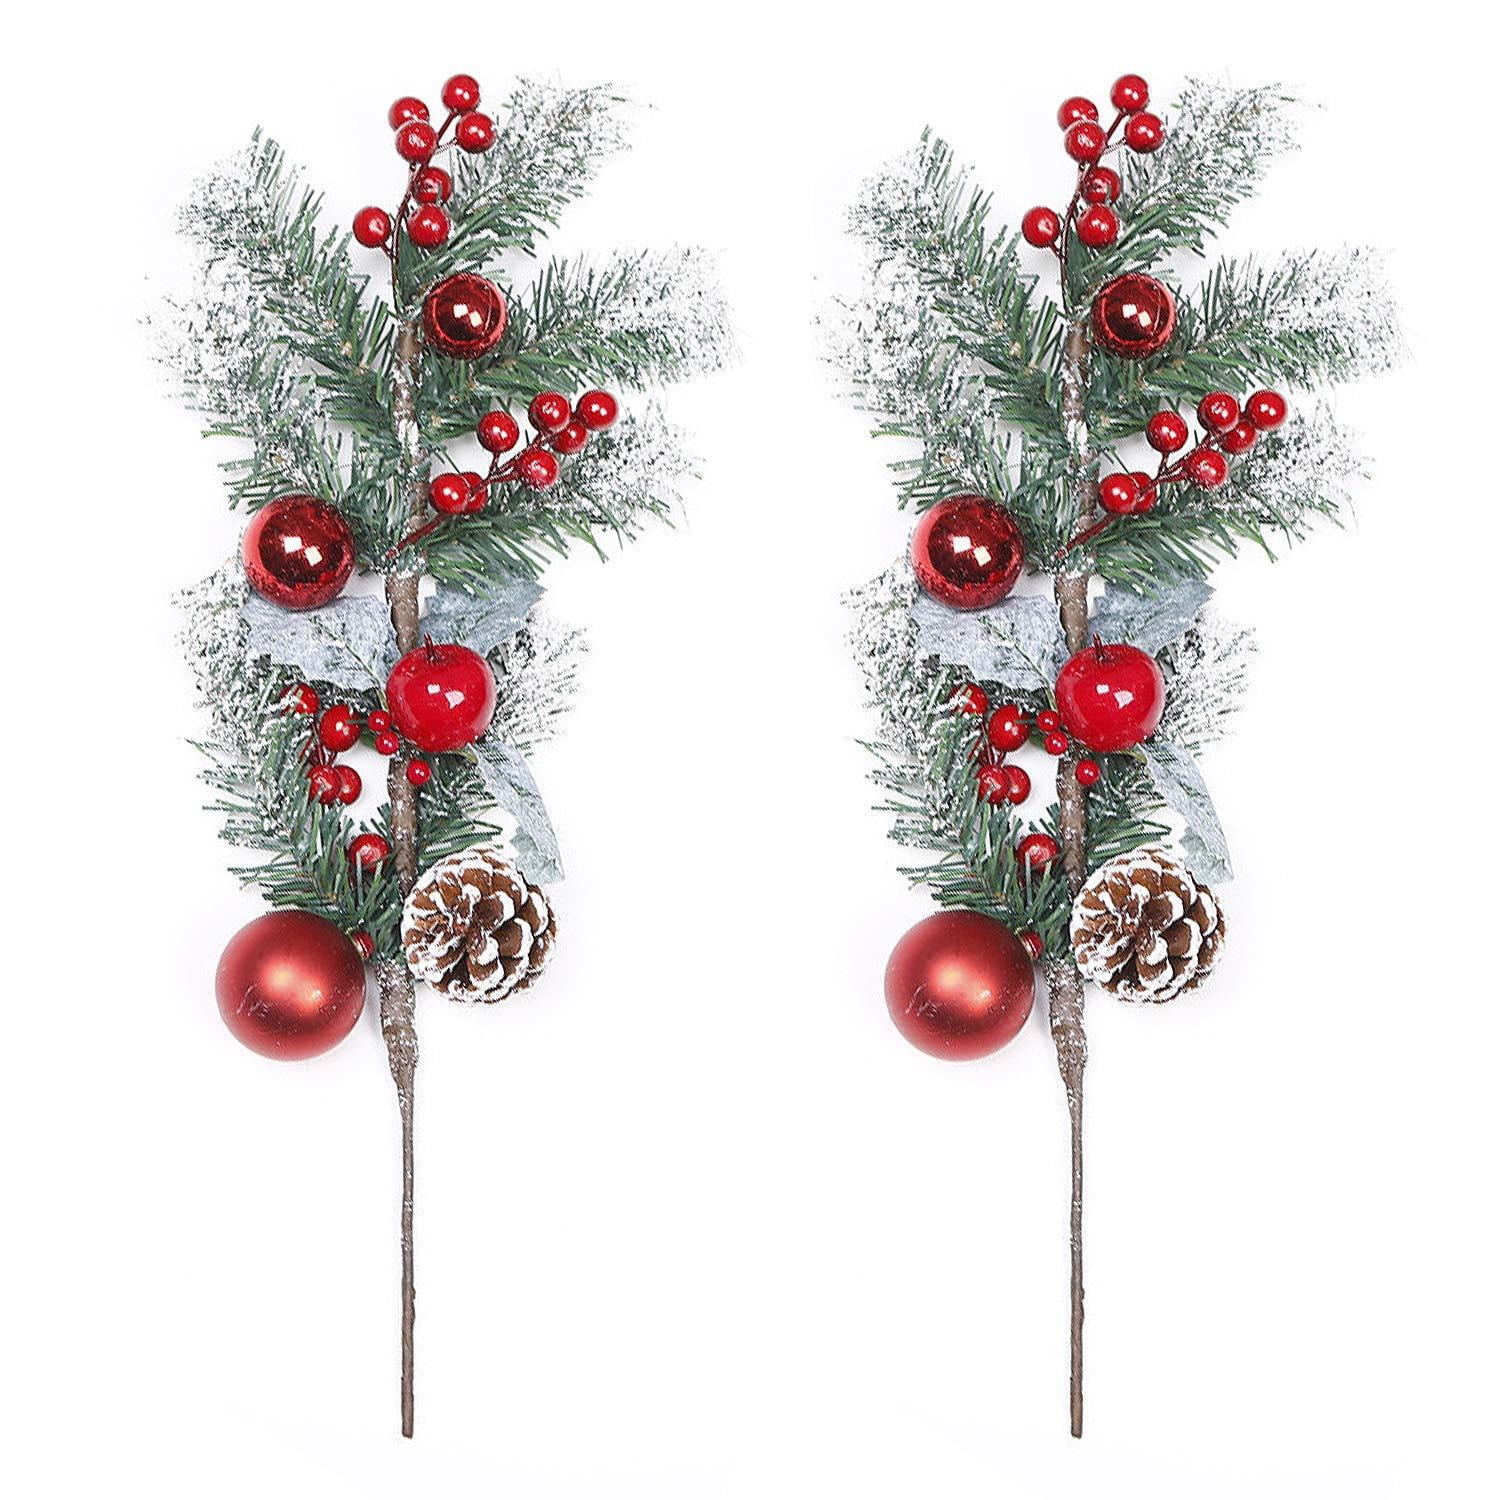  ULTNICE 100pcs Home Decor Red Garland Holly Berry Stems Picks  Decor for Home Berry Stems Pine Branches Winter Floral Picks Artificial  Pine Picks Small Fake Winter Christmas Decorative Line : Home